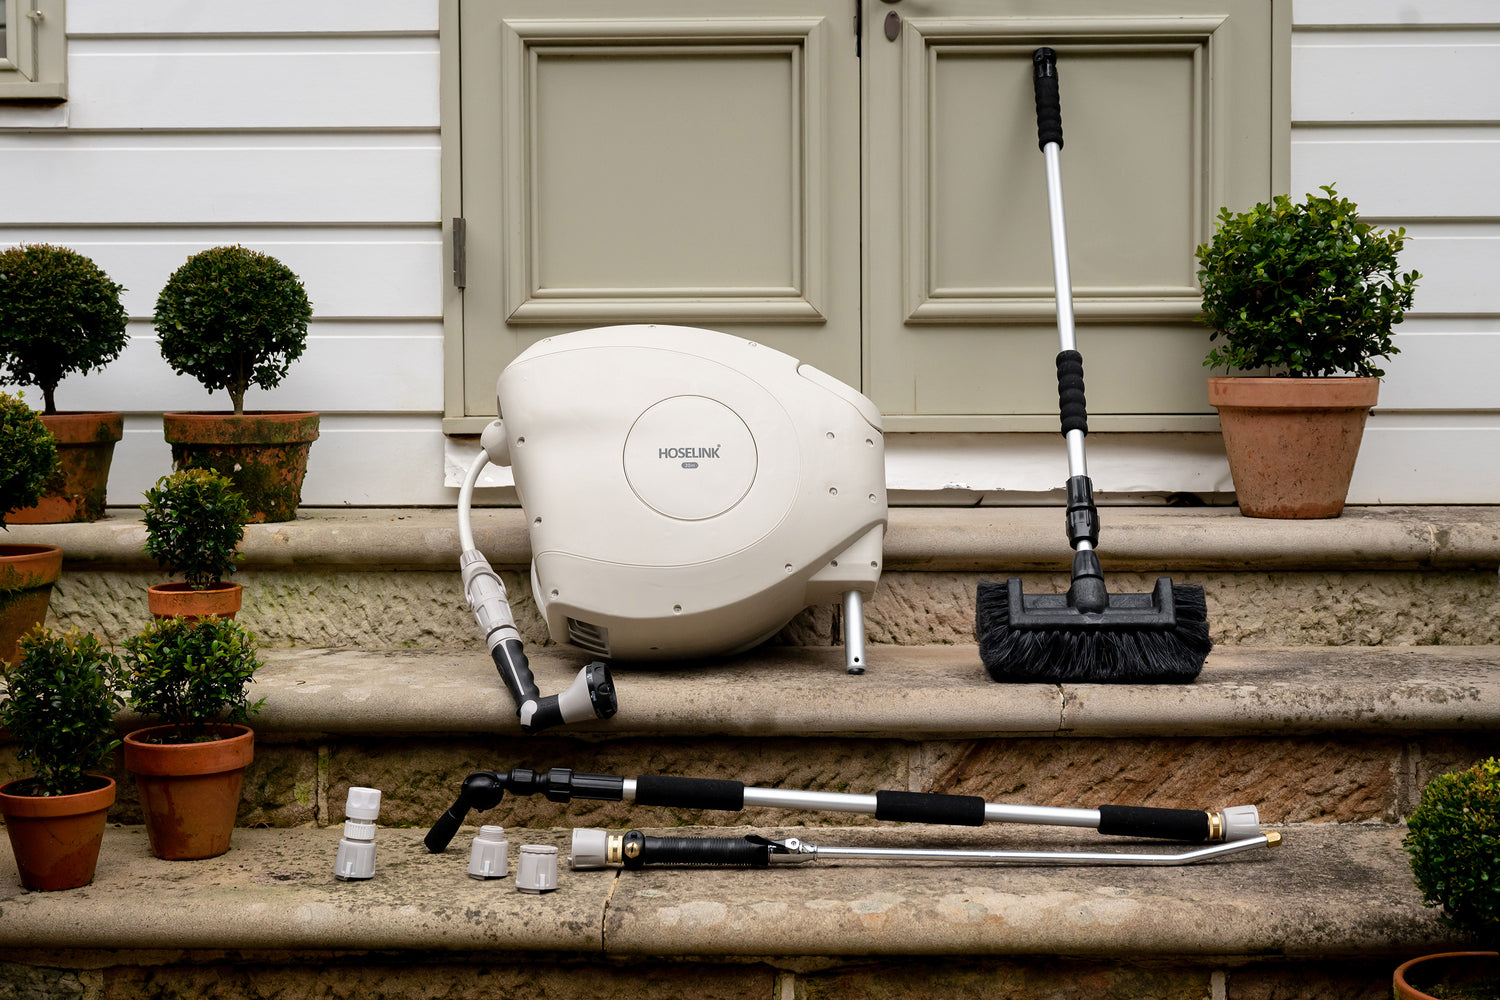 Beige Hose Reel sitting on stone steps outside a house surrounded by Hoselink tools including the Cleaning Brush, Connectors, Pivot Gutter Cleaner and Super Jet Washer